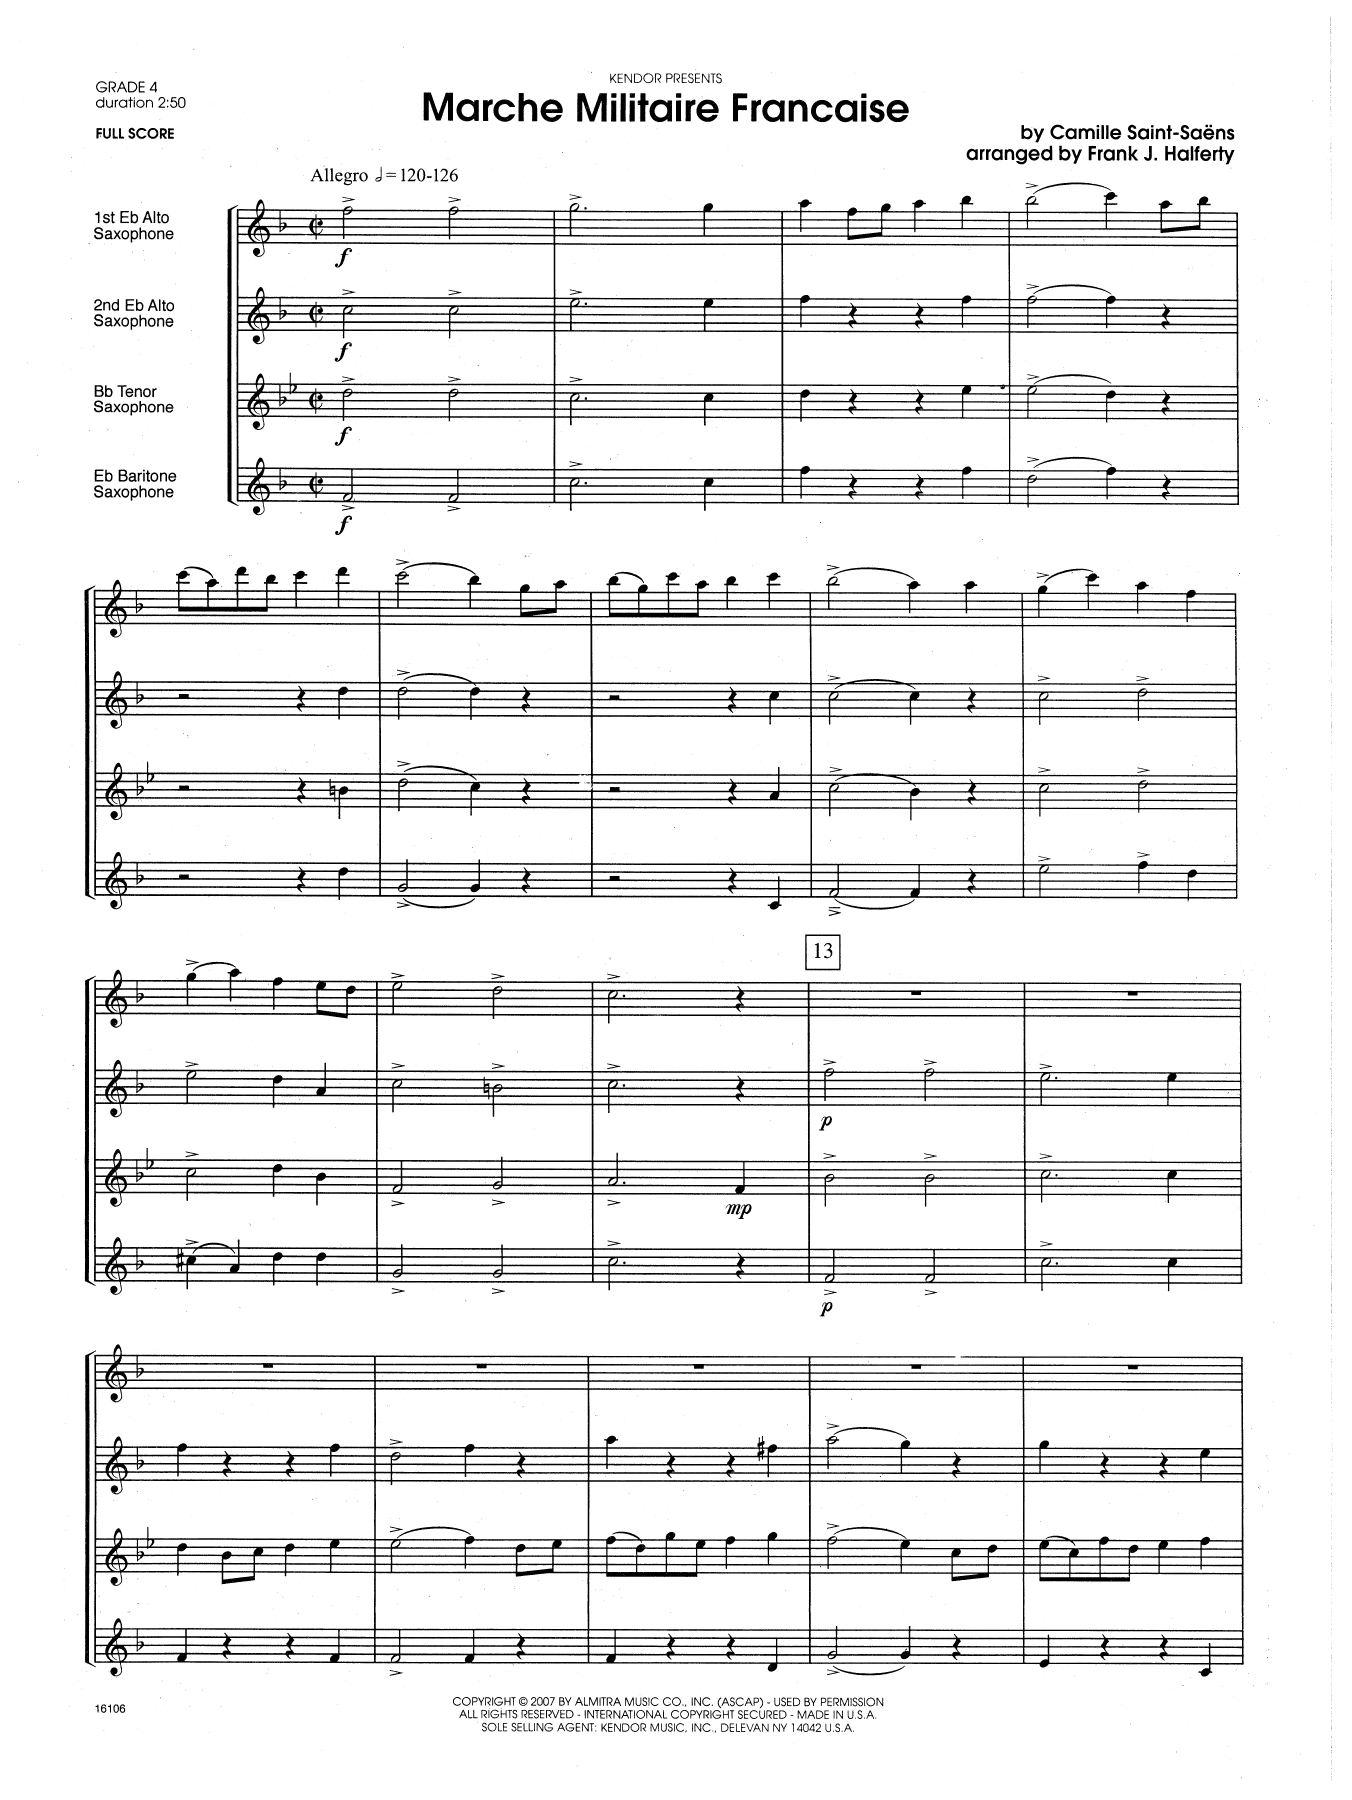 Frank J. Halferty Marche Militaire Francaise - Full Score sheet music notes and chords. Download Printable PDF.